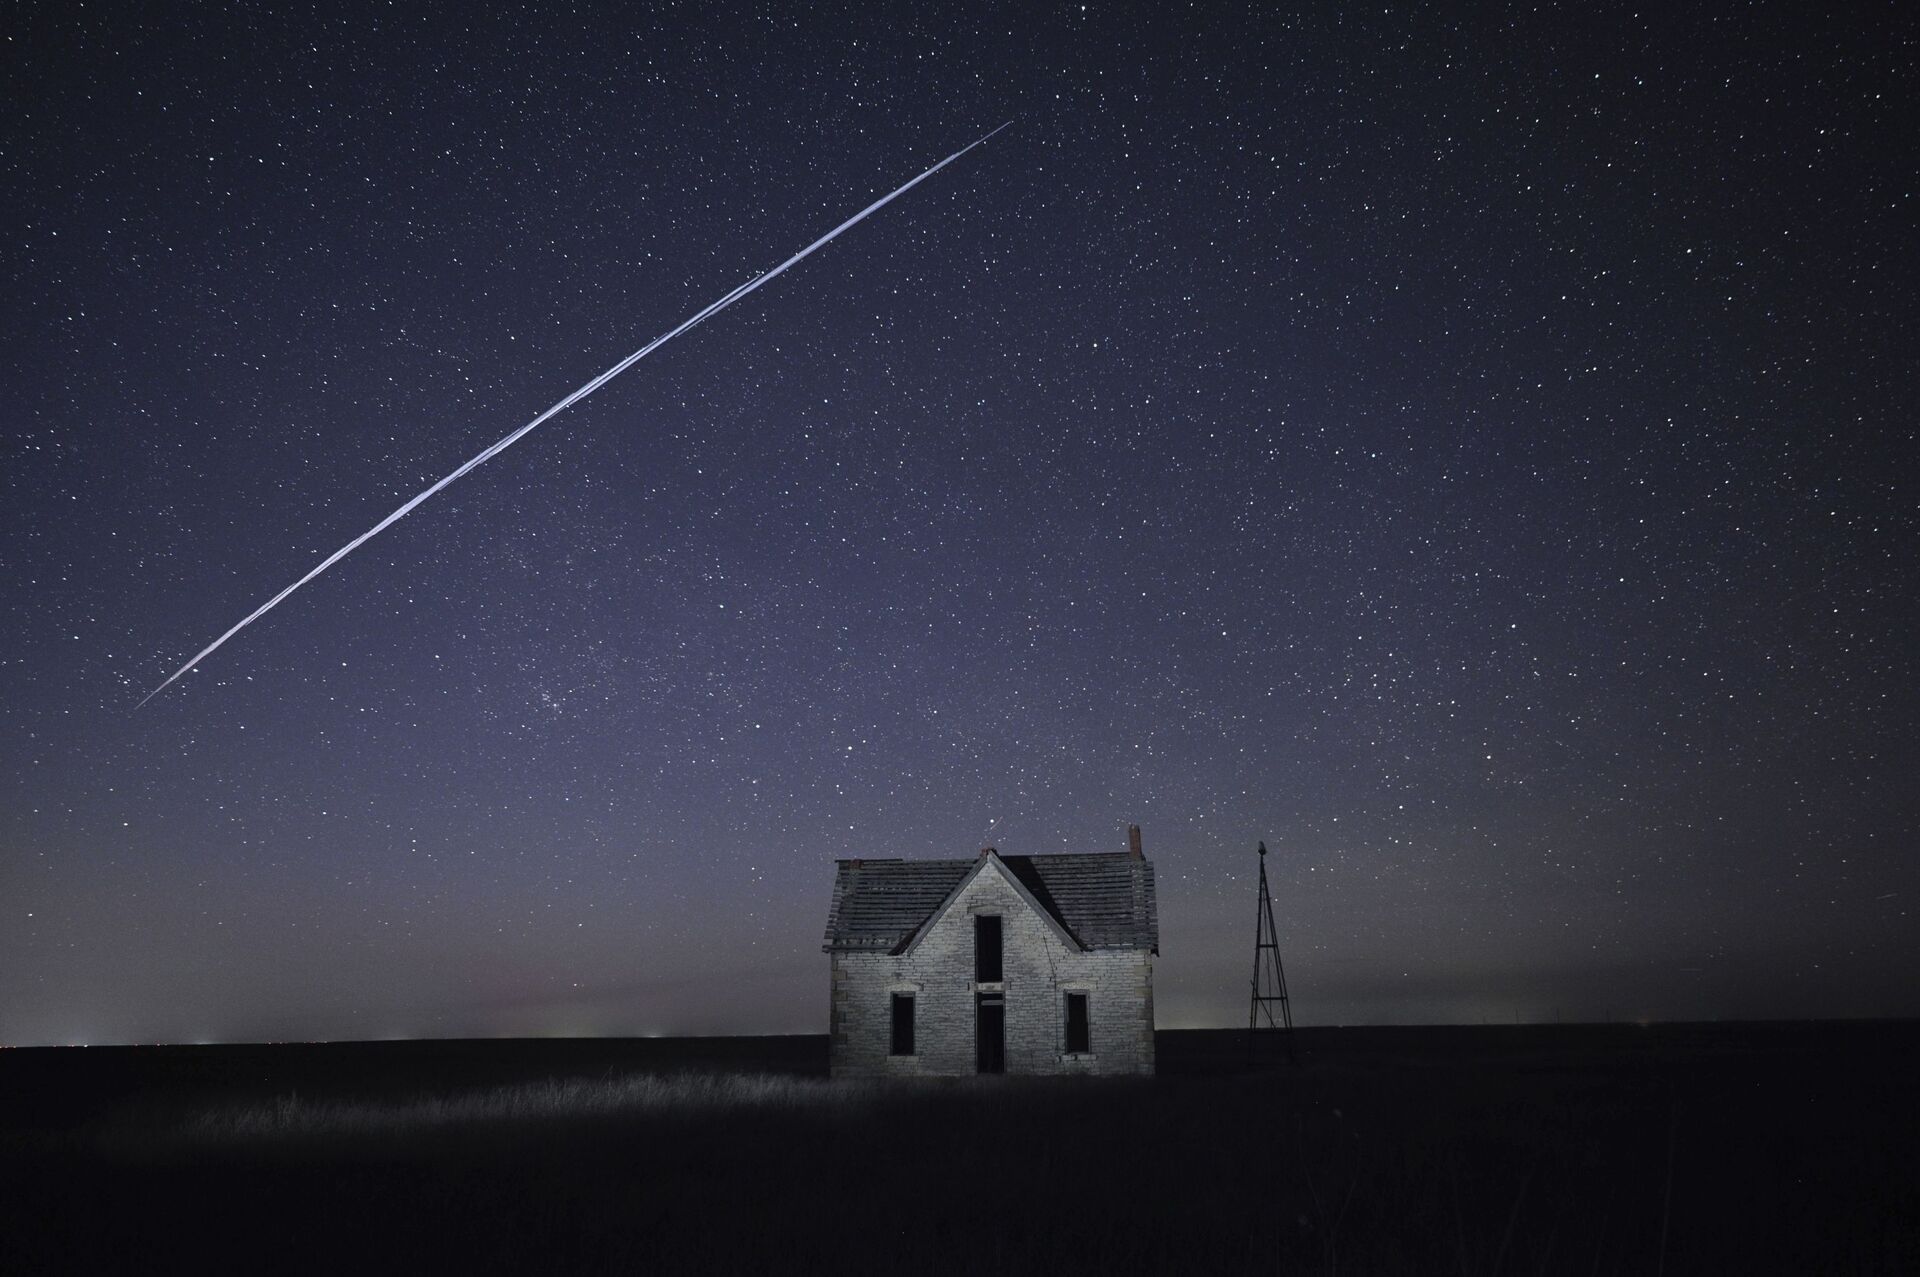 File-In this photo taken May 6, 2021, with a long exposure, a string of SpaceX StarLink satellites passes over an old stone house near Florence, Kan - Sputnik International, 1920, 07.09.2021